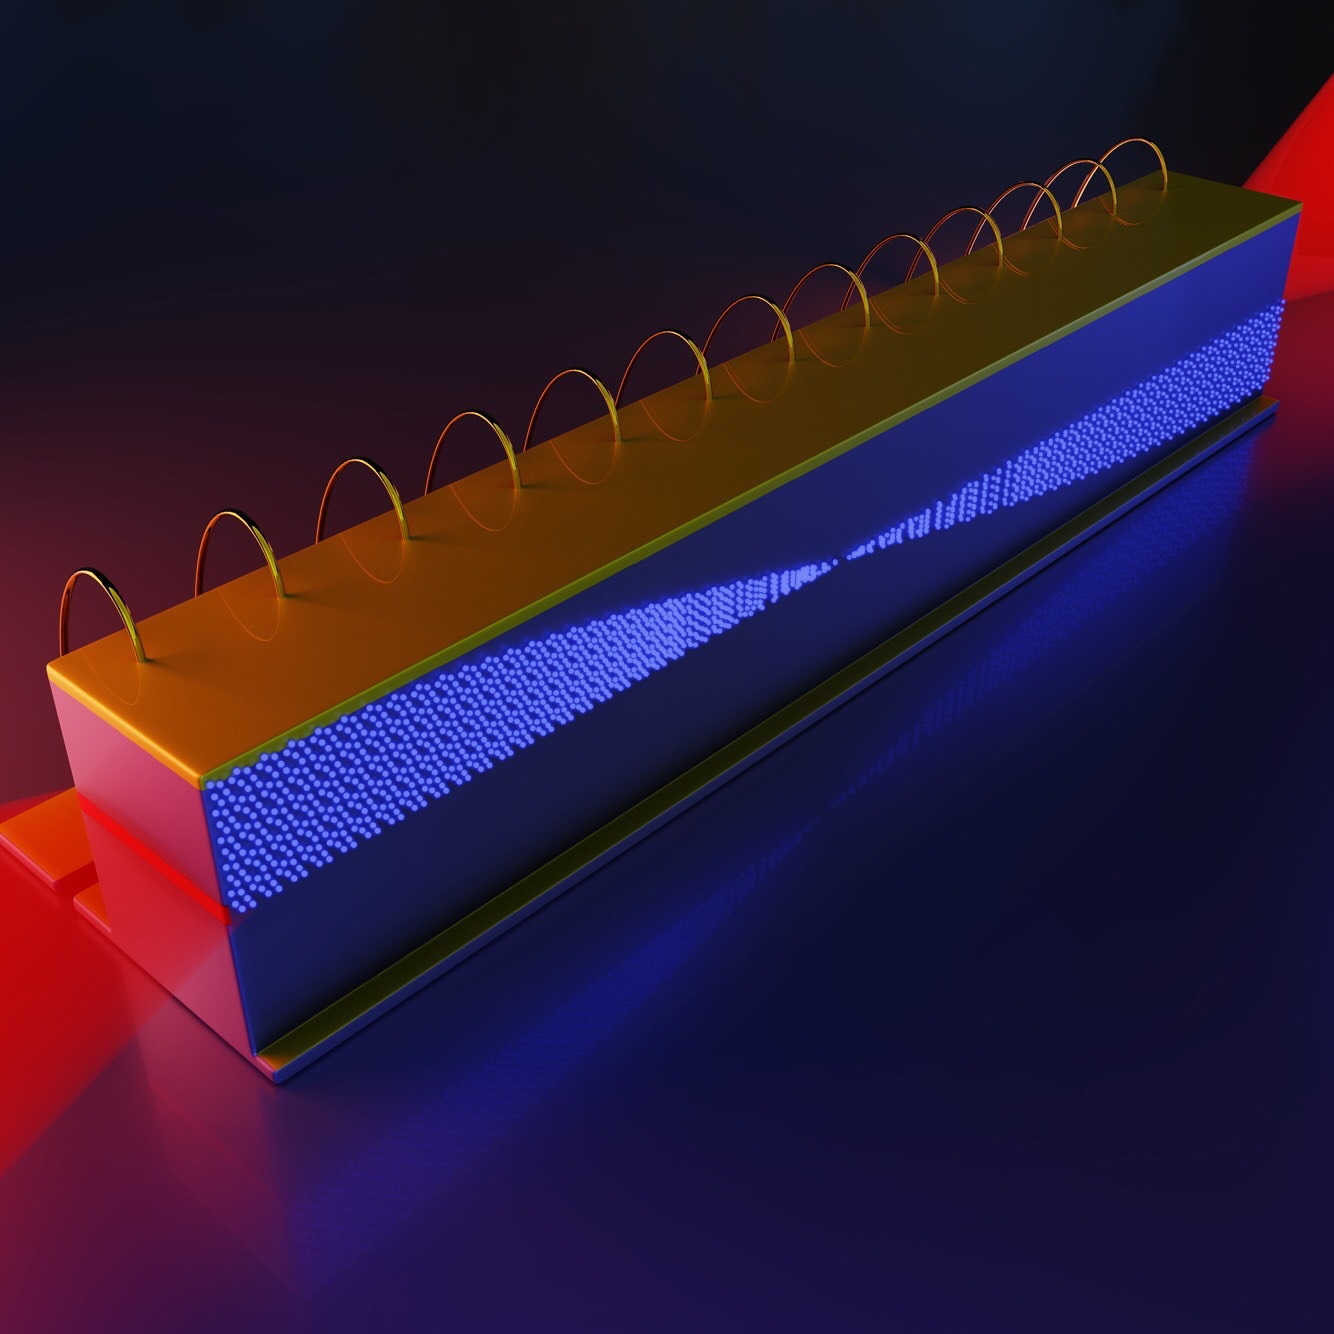 Inside an infrared frequency comb in a quantum cascade laser, the different frequencies of light beat together to generate microwave radiation